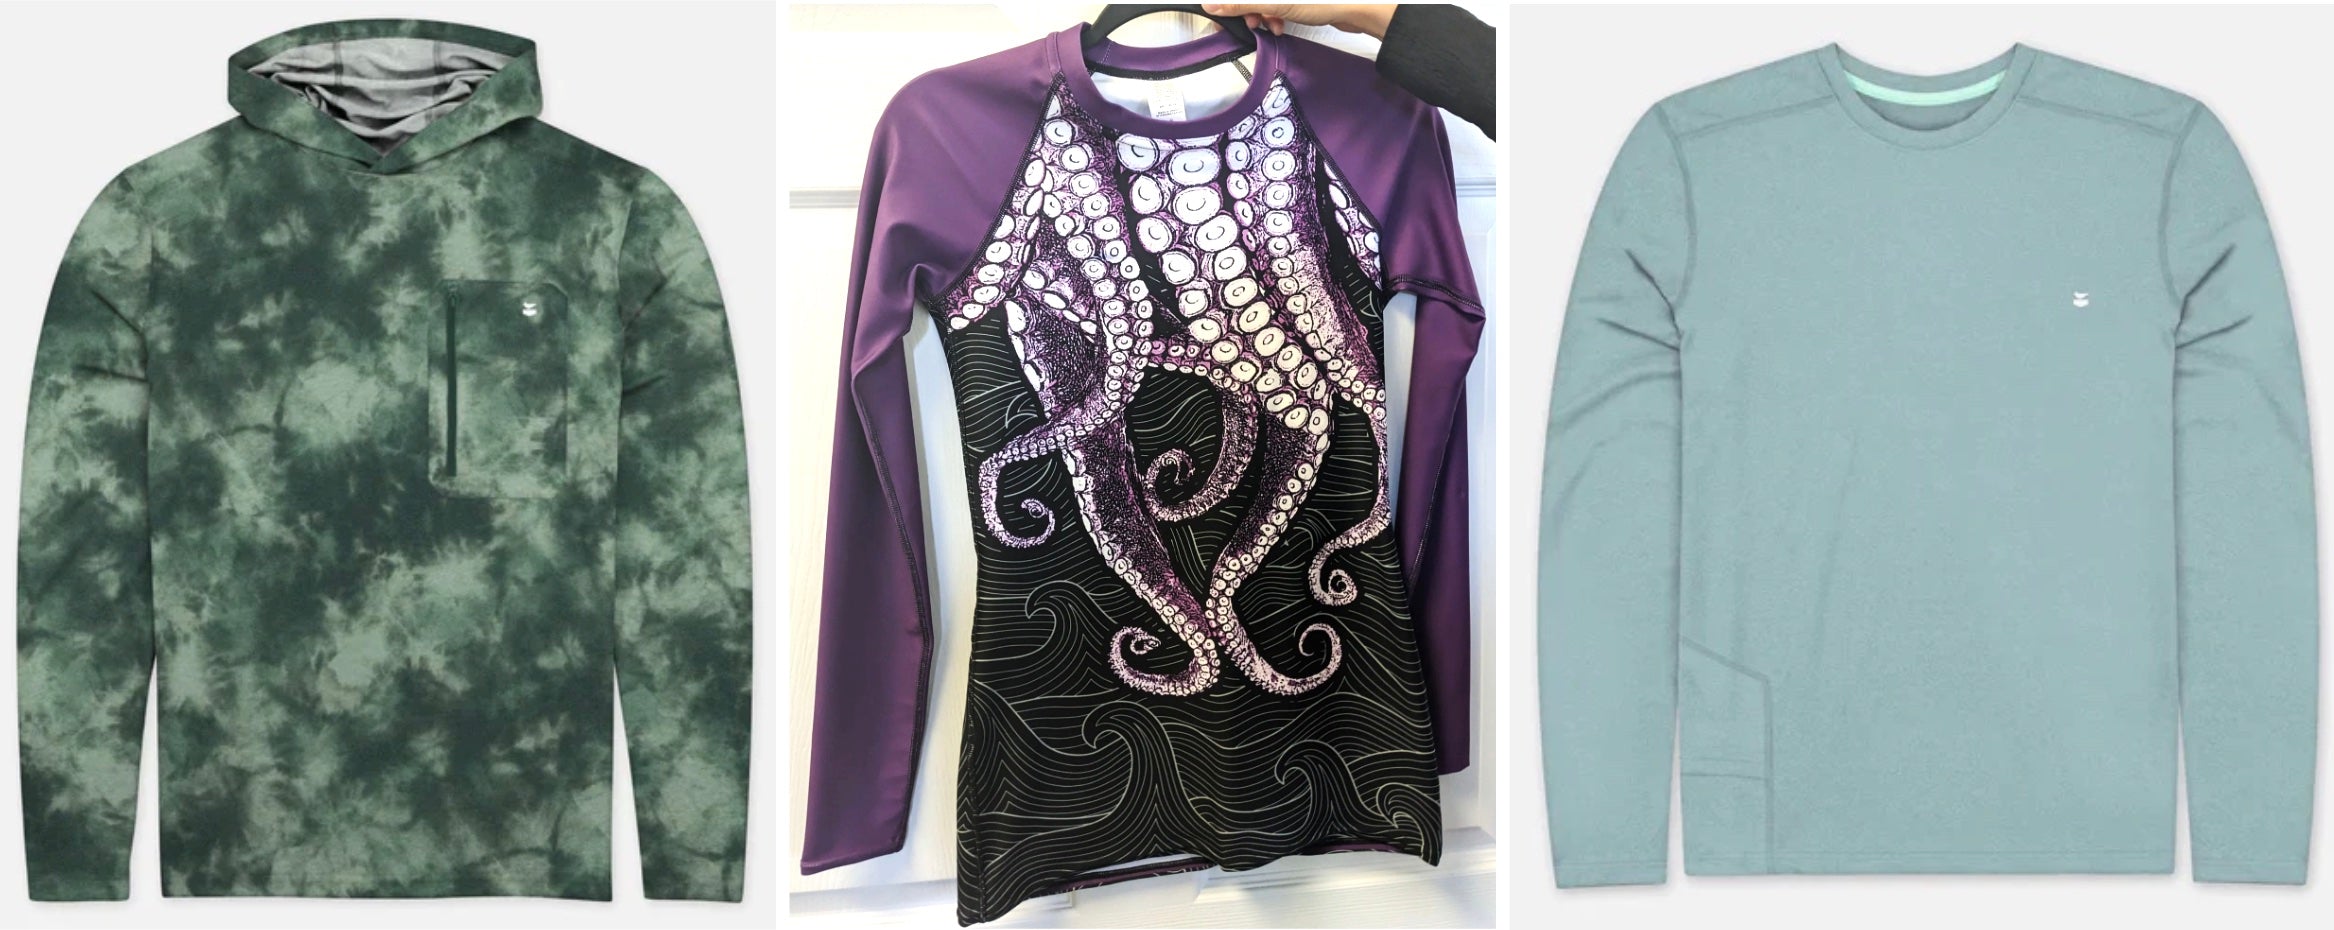 Sea Gods Autumn Attire - what to wear paddle boarding in autumn